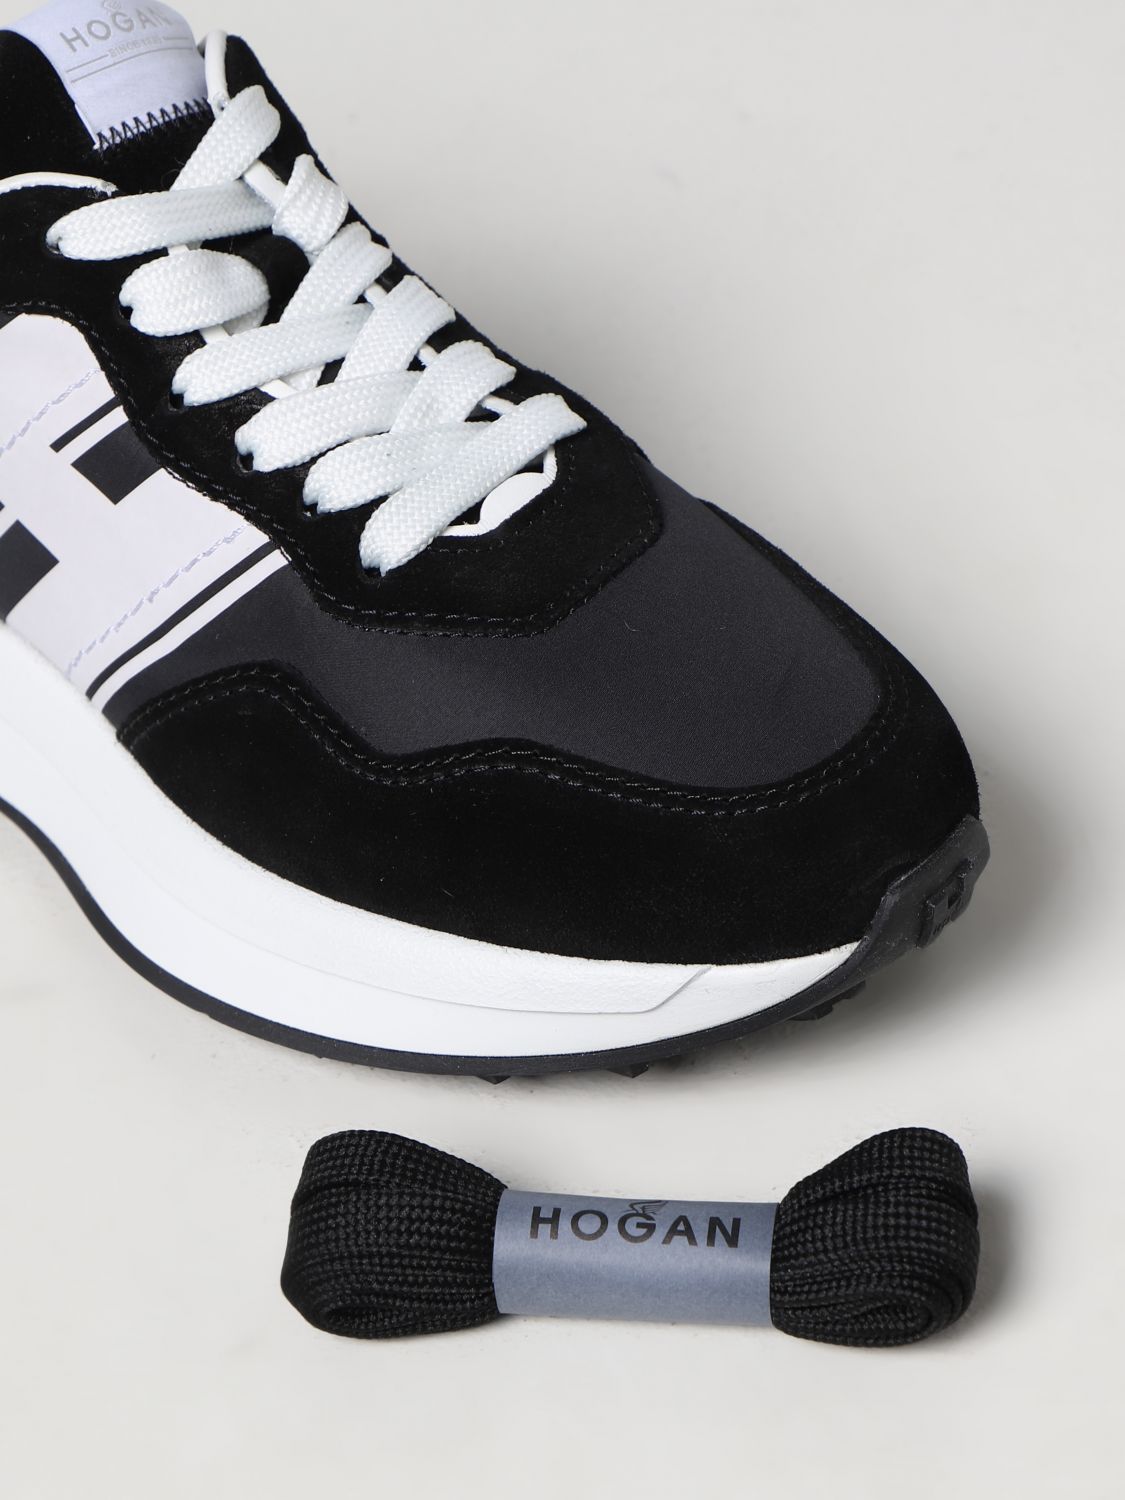 Andrew Halliday telex Pogo stick sprong HOGAN: sneakers for woman - Black | Hogan sneakers HXW6410EV80P3E online on  GIGLIO.COM